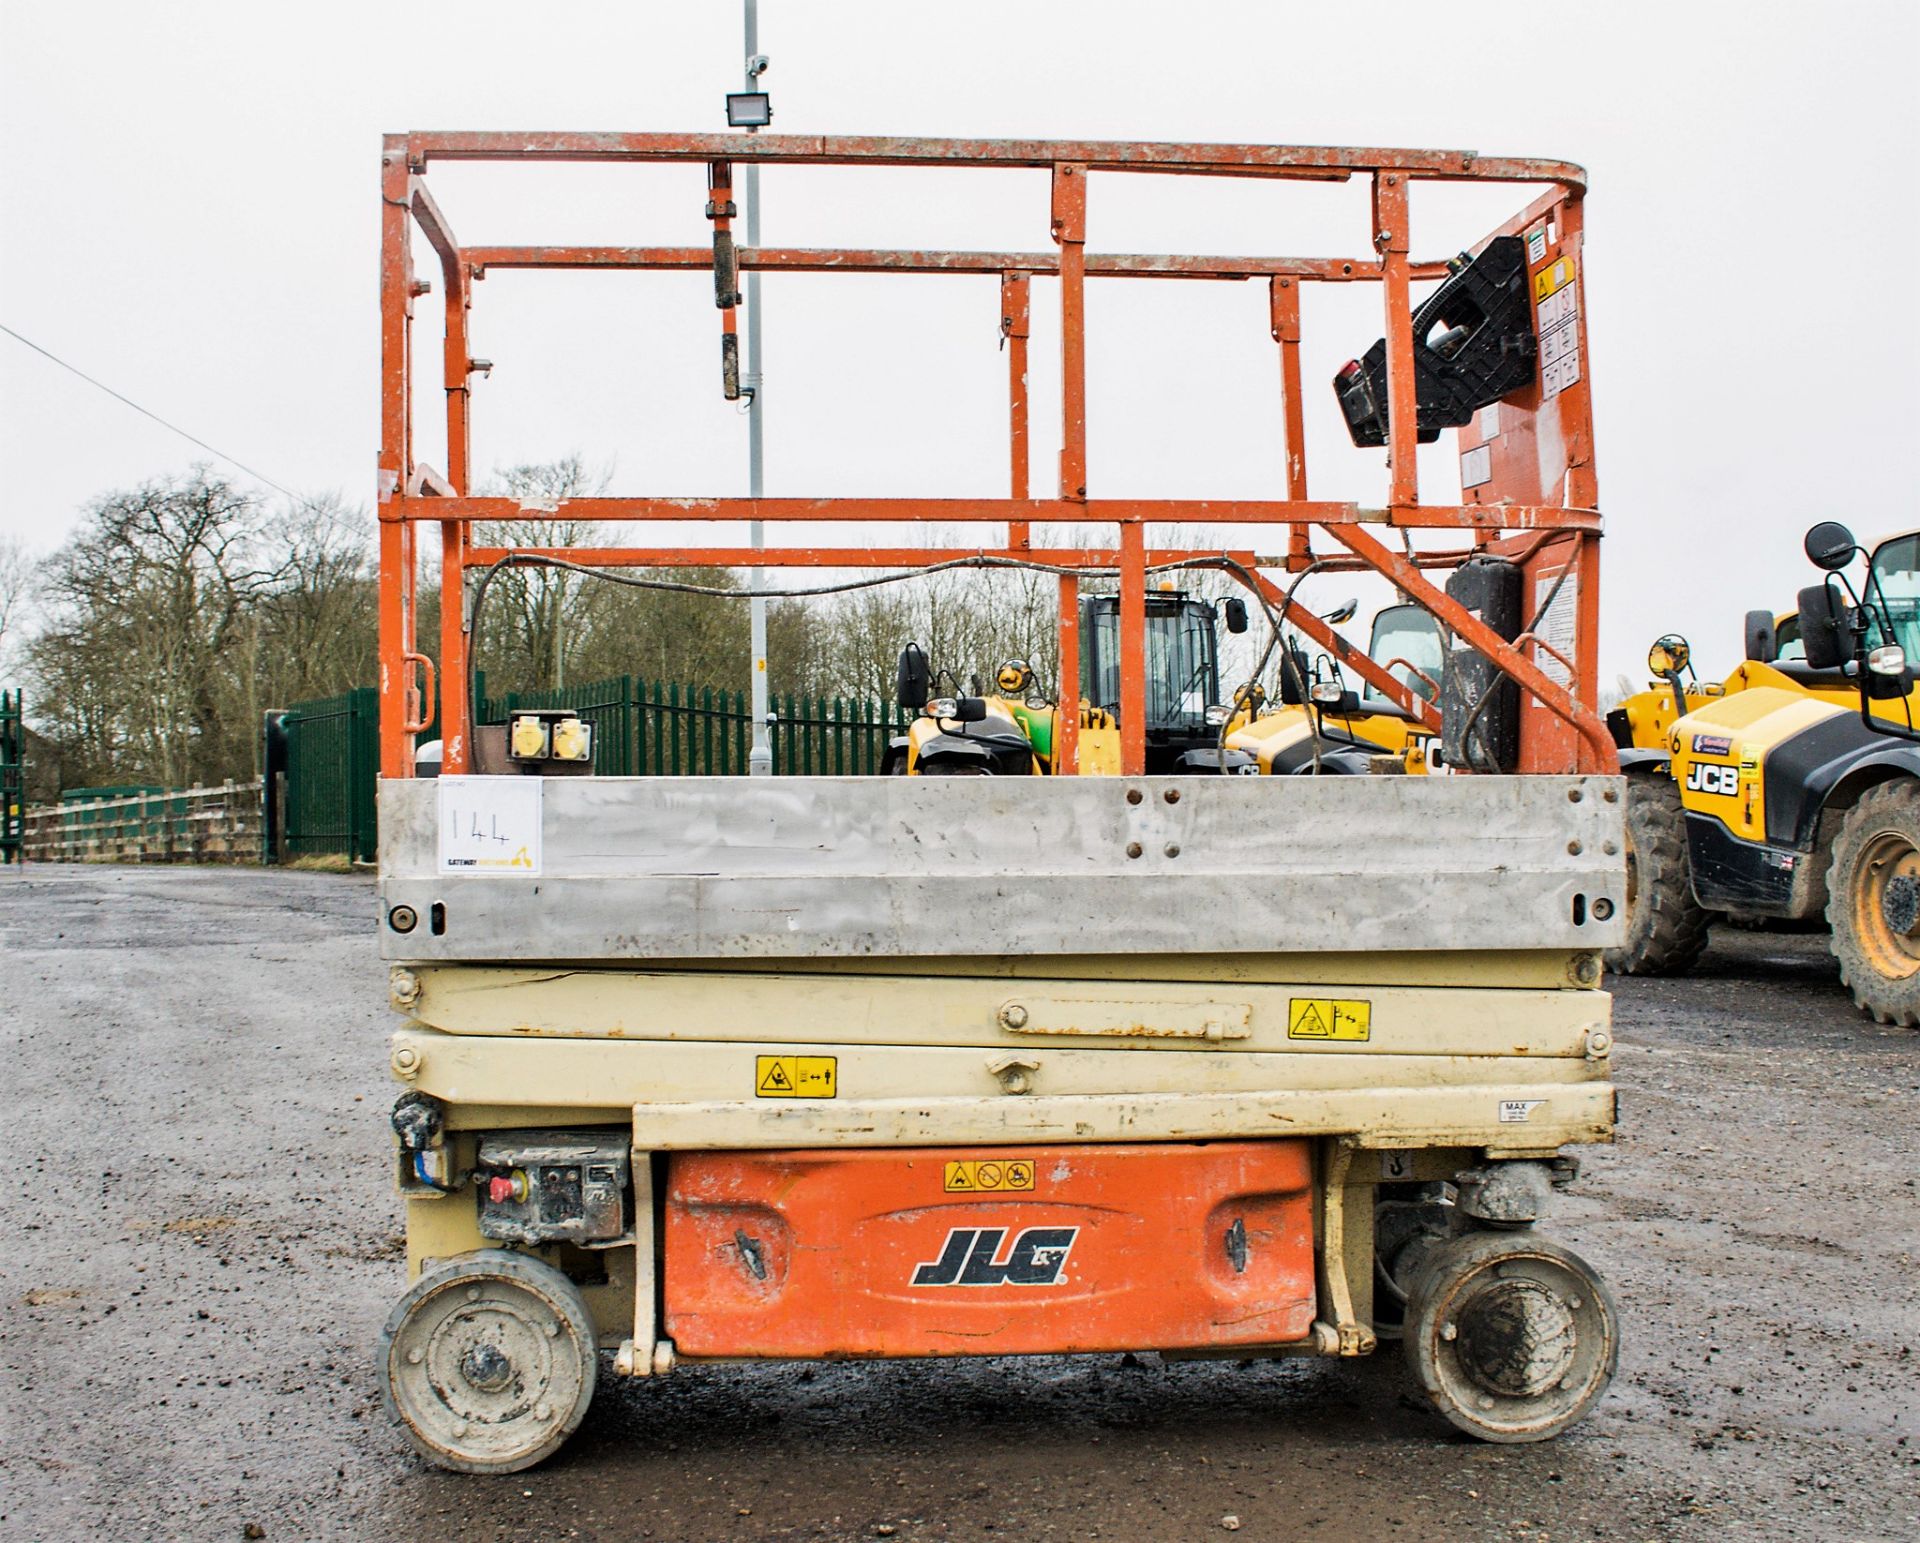 JLG 1930ES battery electric scissor lift Year: 2005 S/N: 5787 Recorded Hours: 355 WOOLPE12 - Image 6 of 8